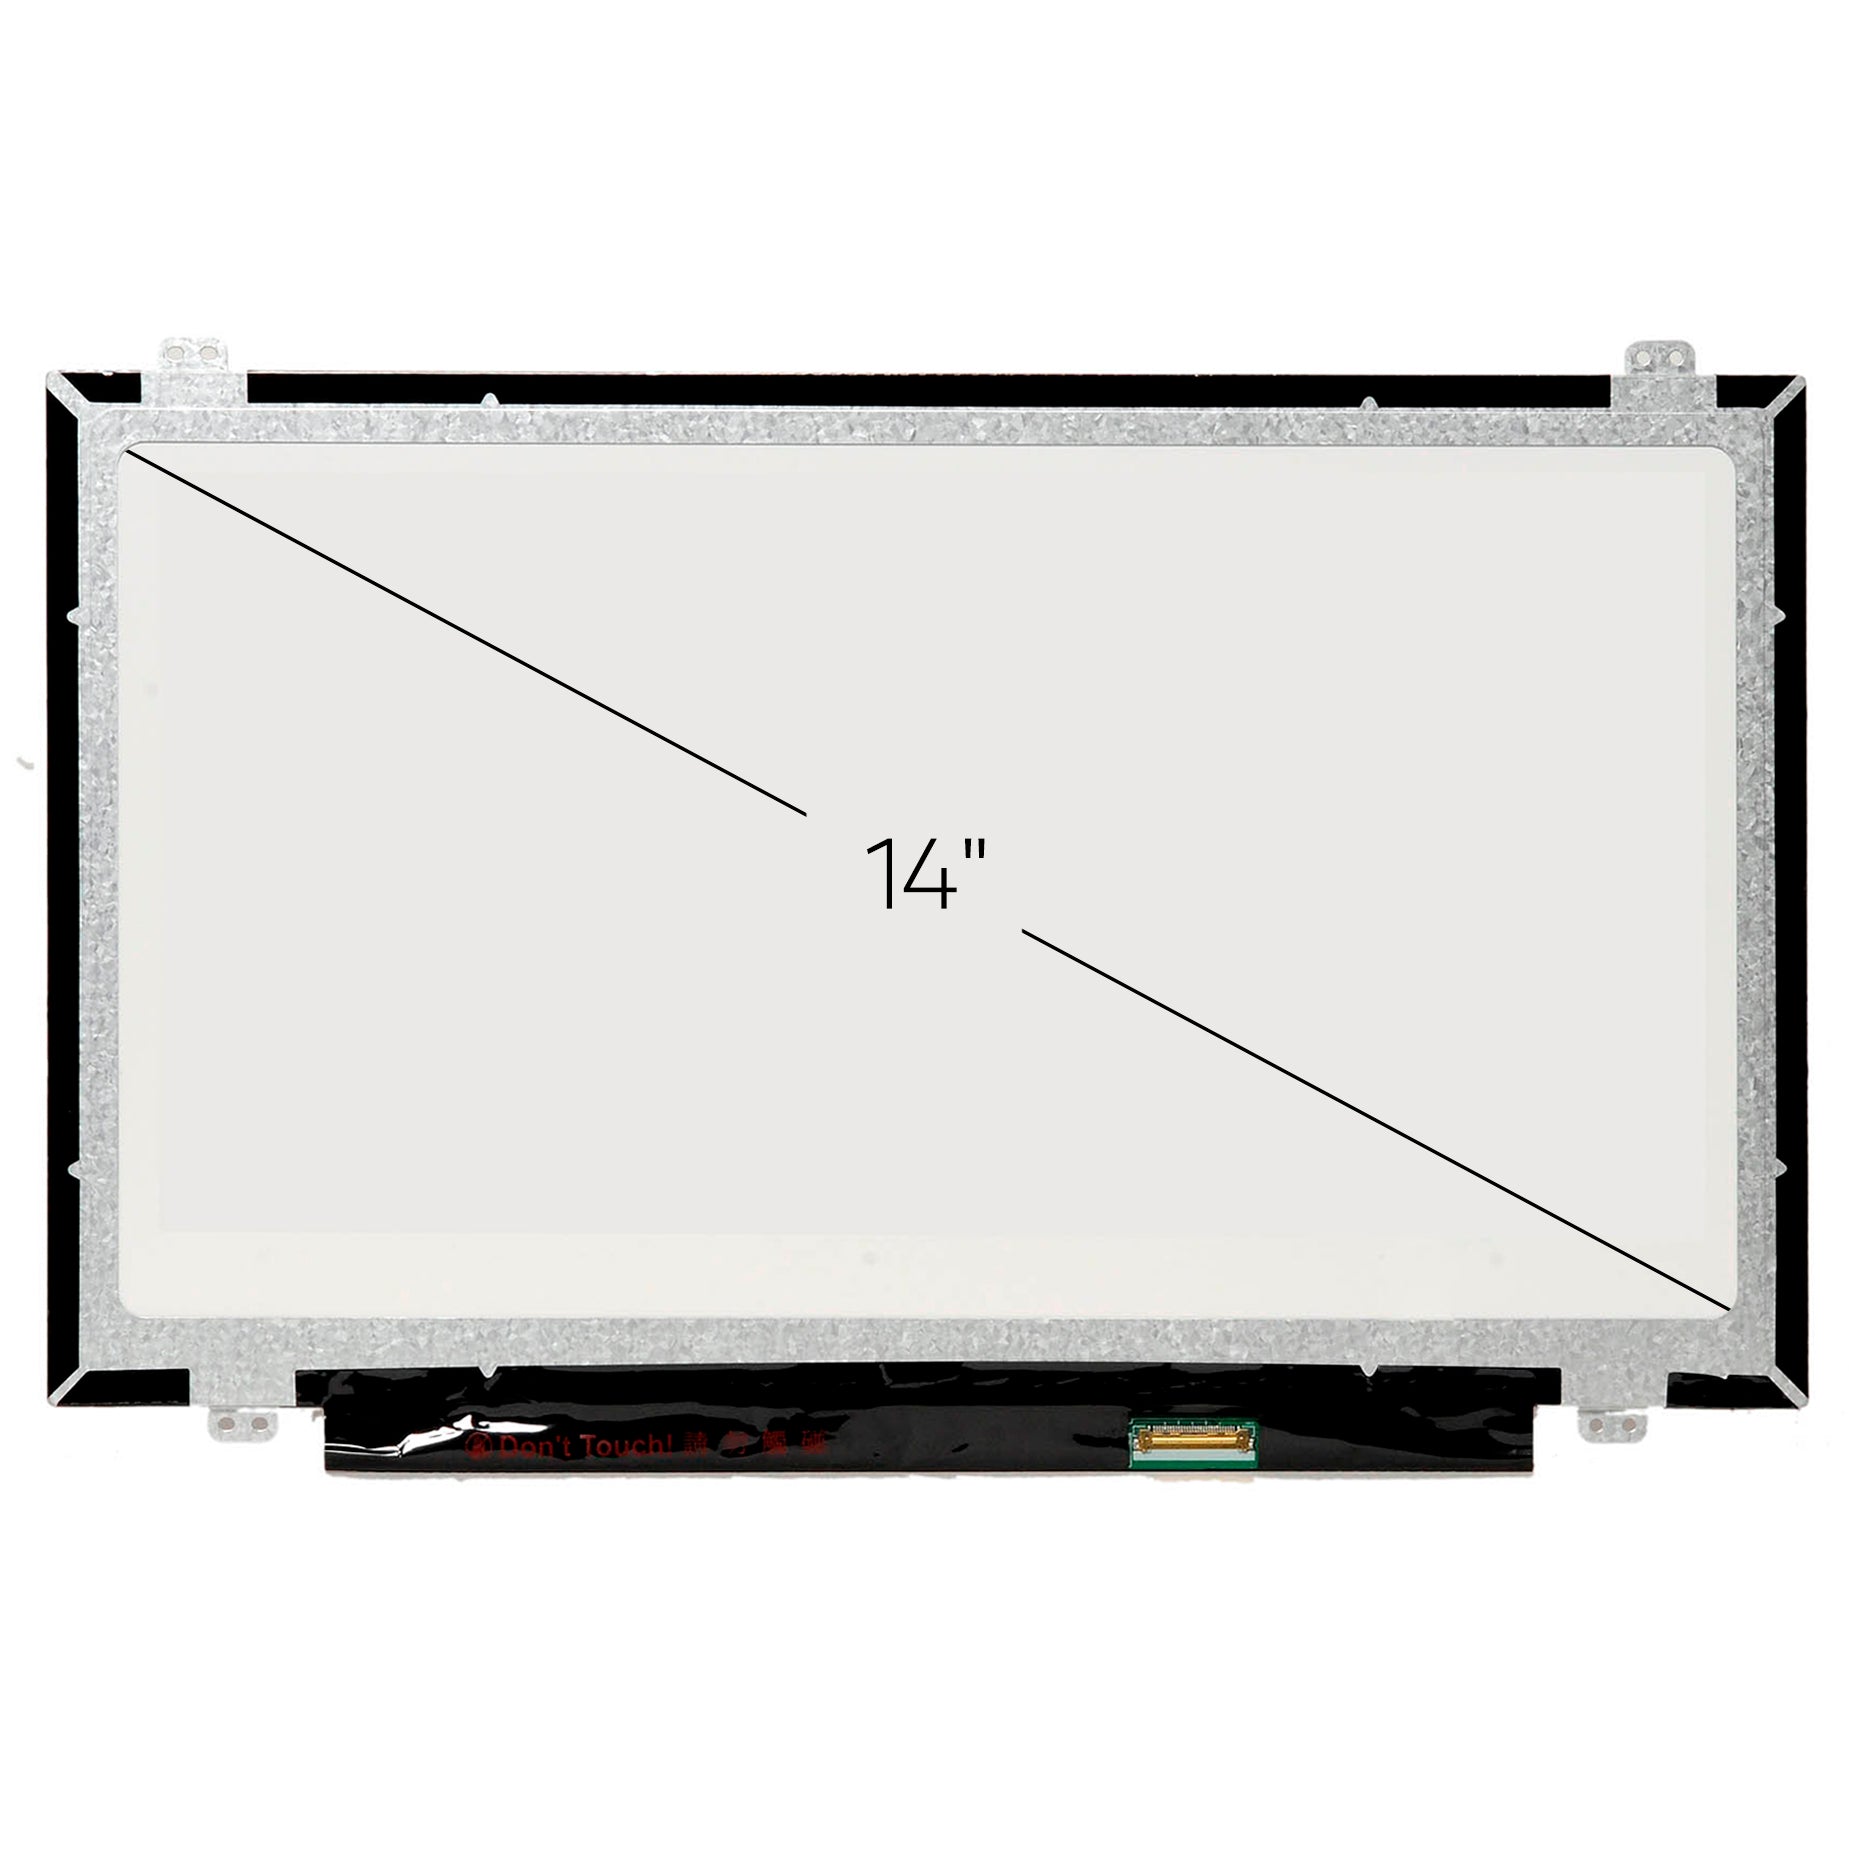 Screen Replacement for Lenovo Thinkpad T440P HD 1366x768 Glossy LCD LED Display